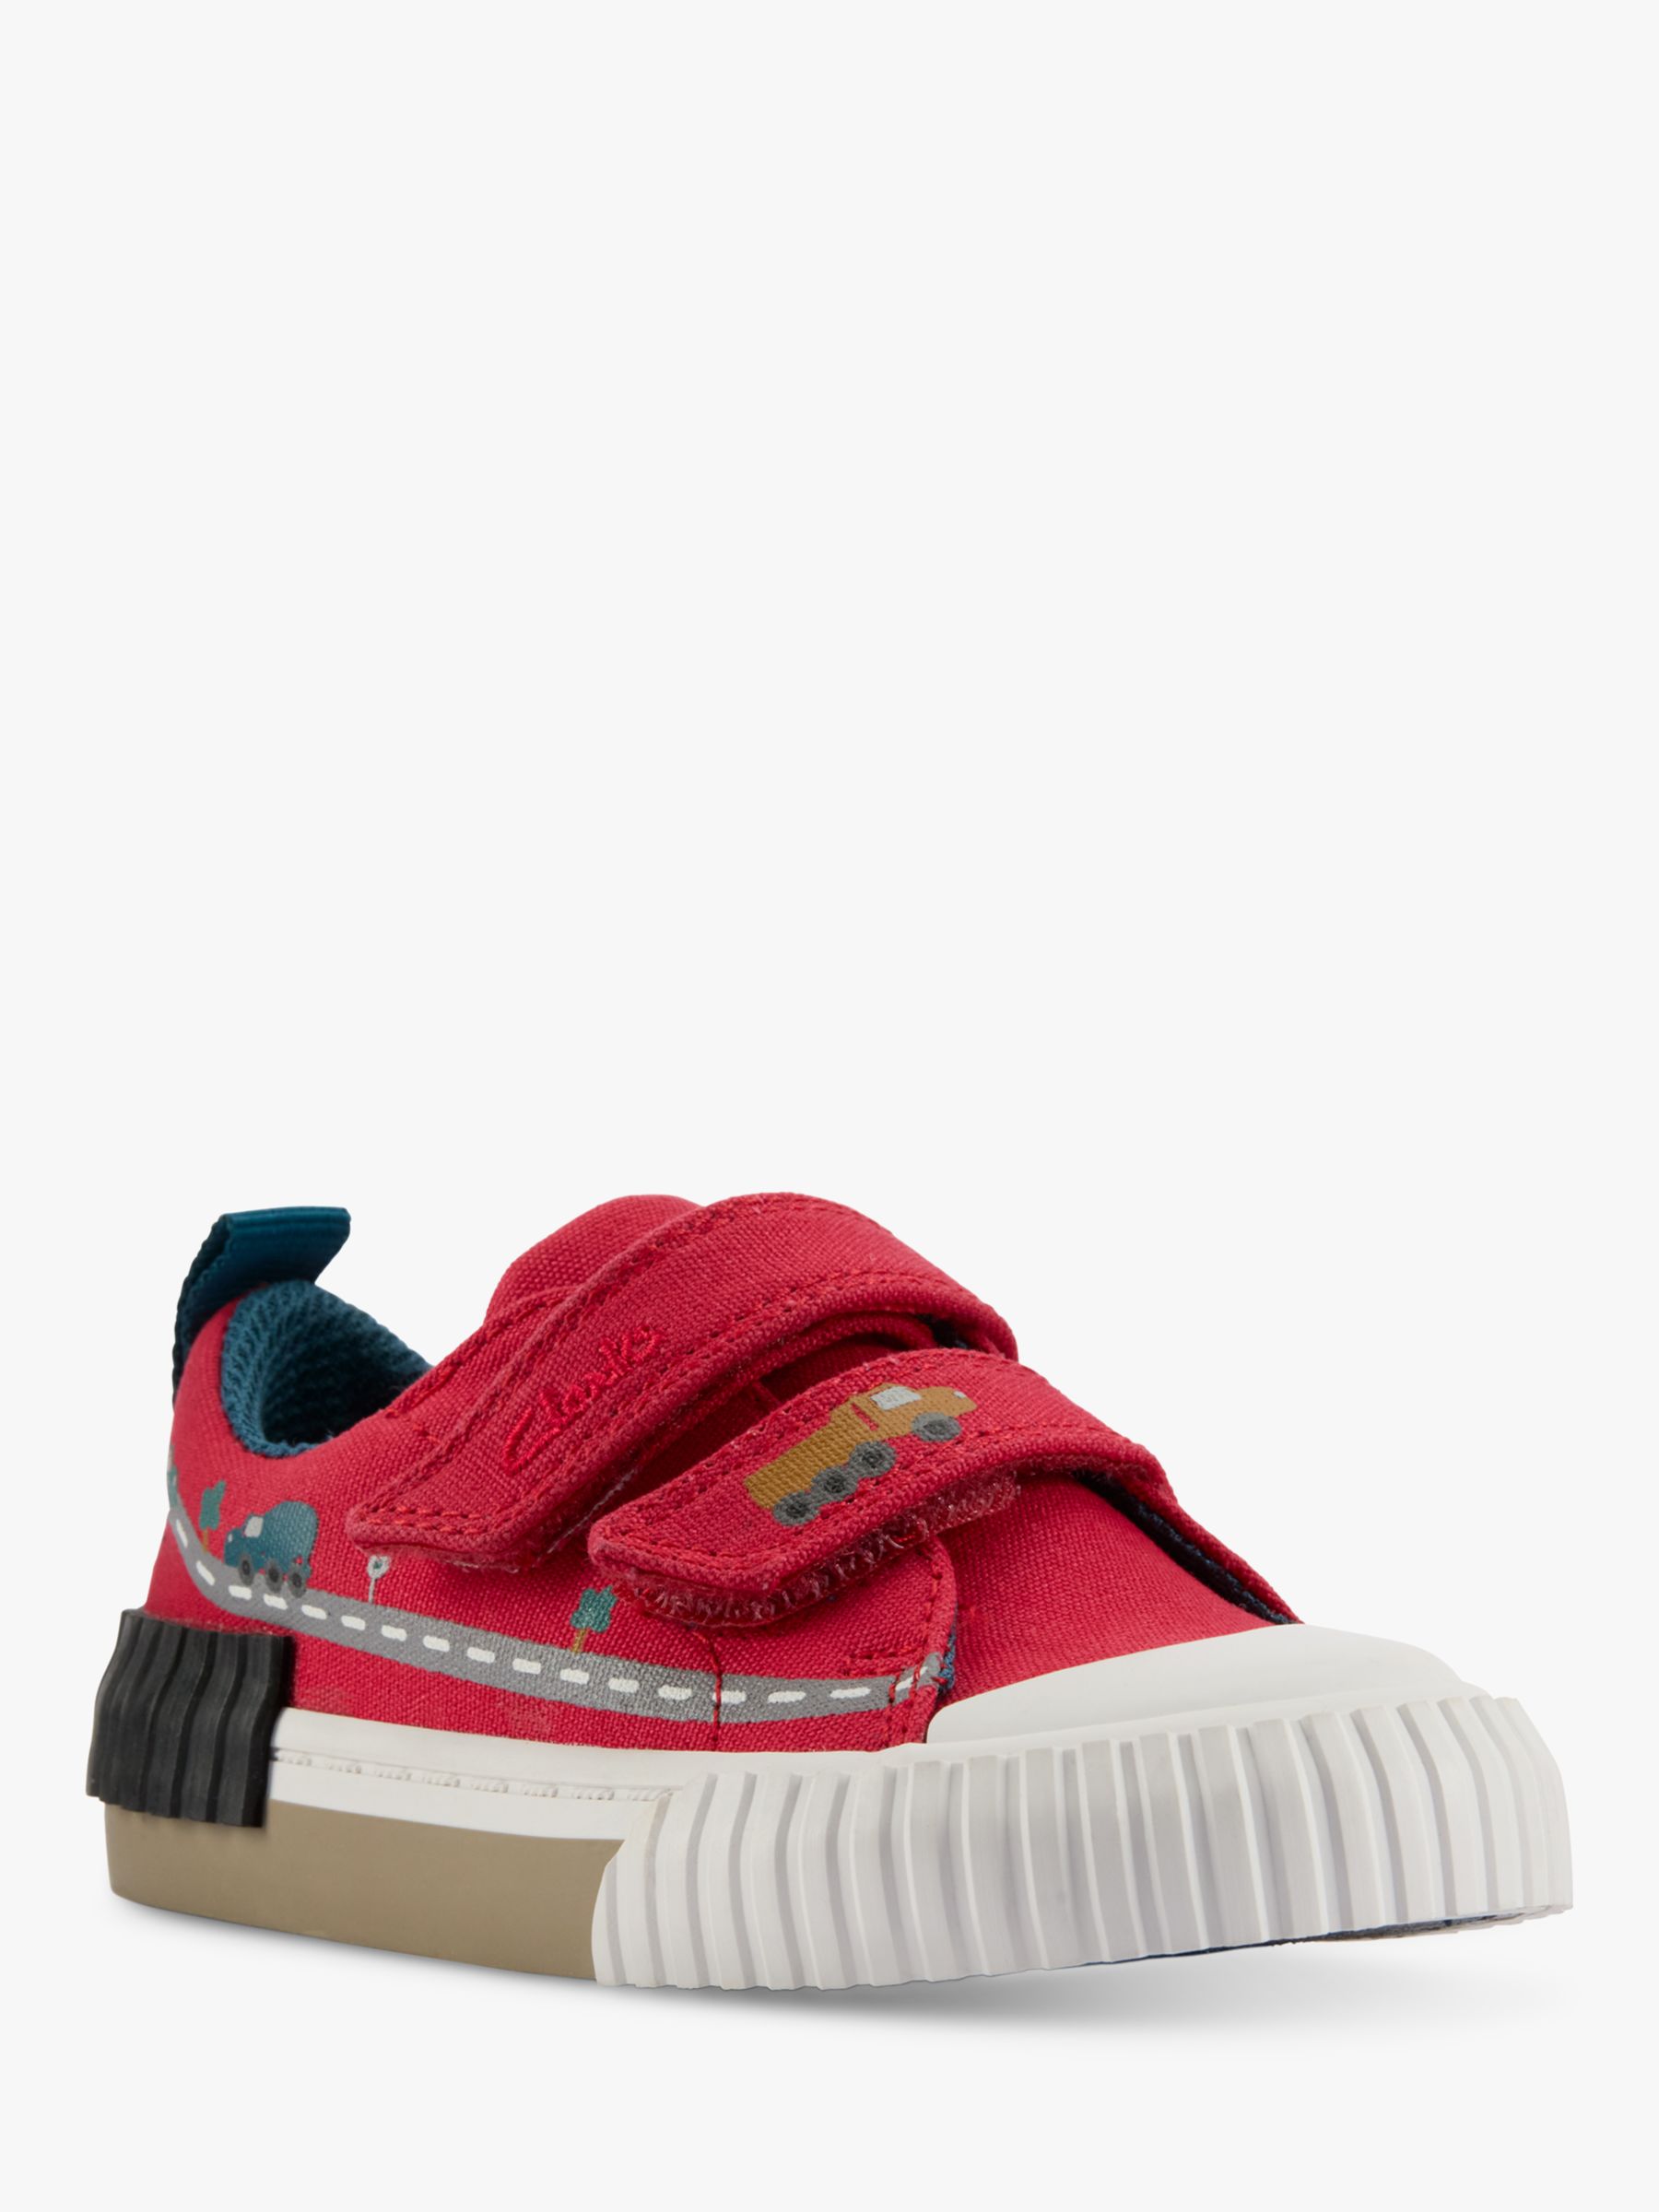 Clarks Kids' Foxing Truck Canvas Shoes, Red/Multi, 6G Jnr